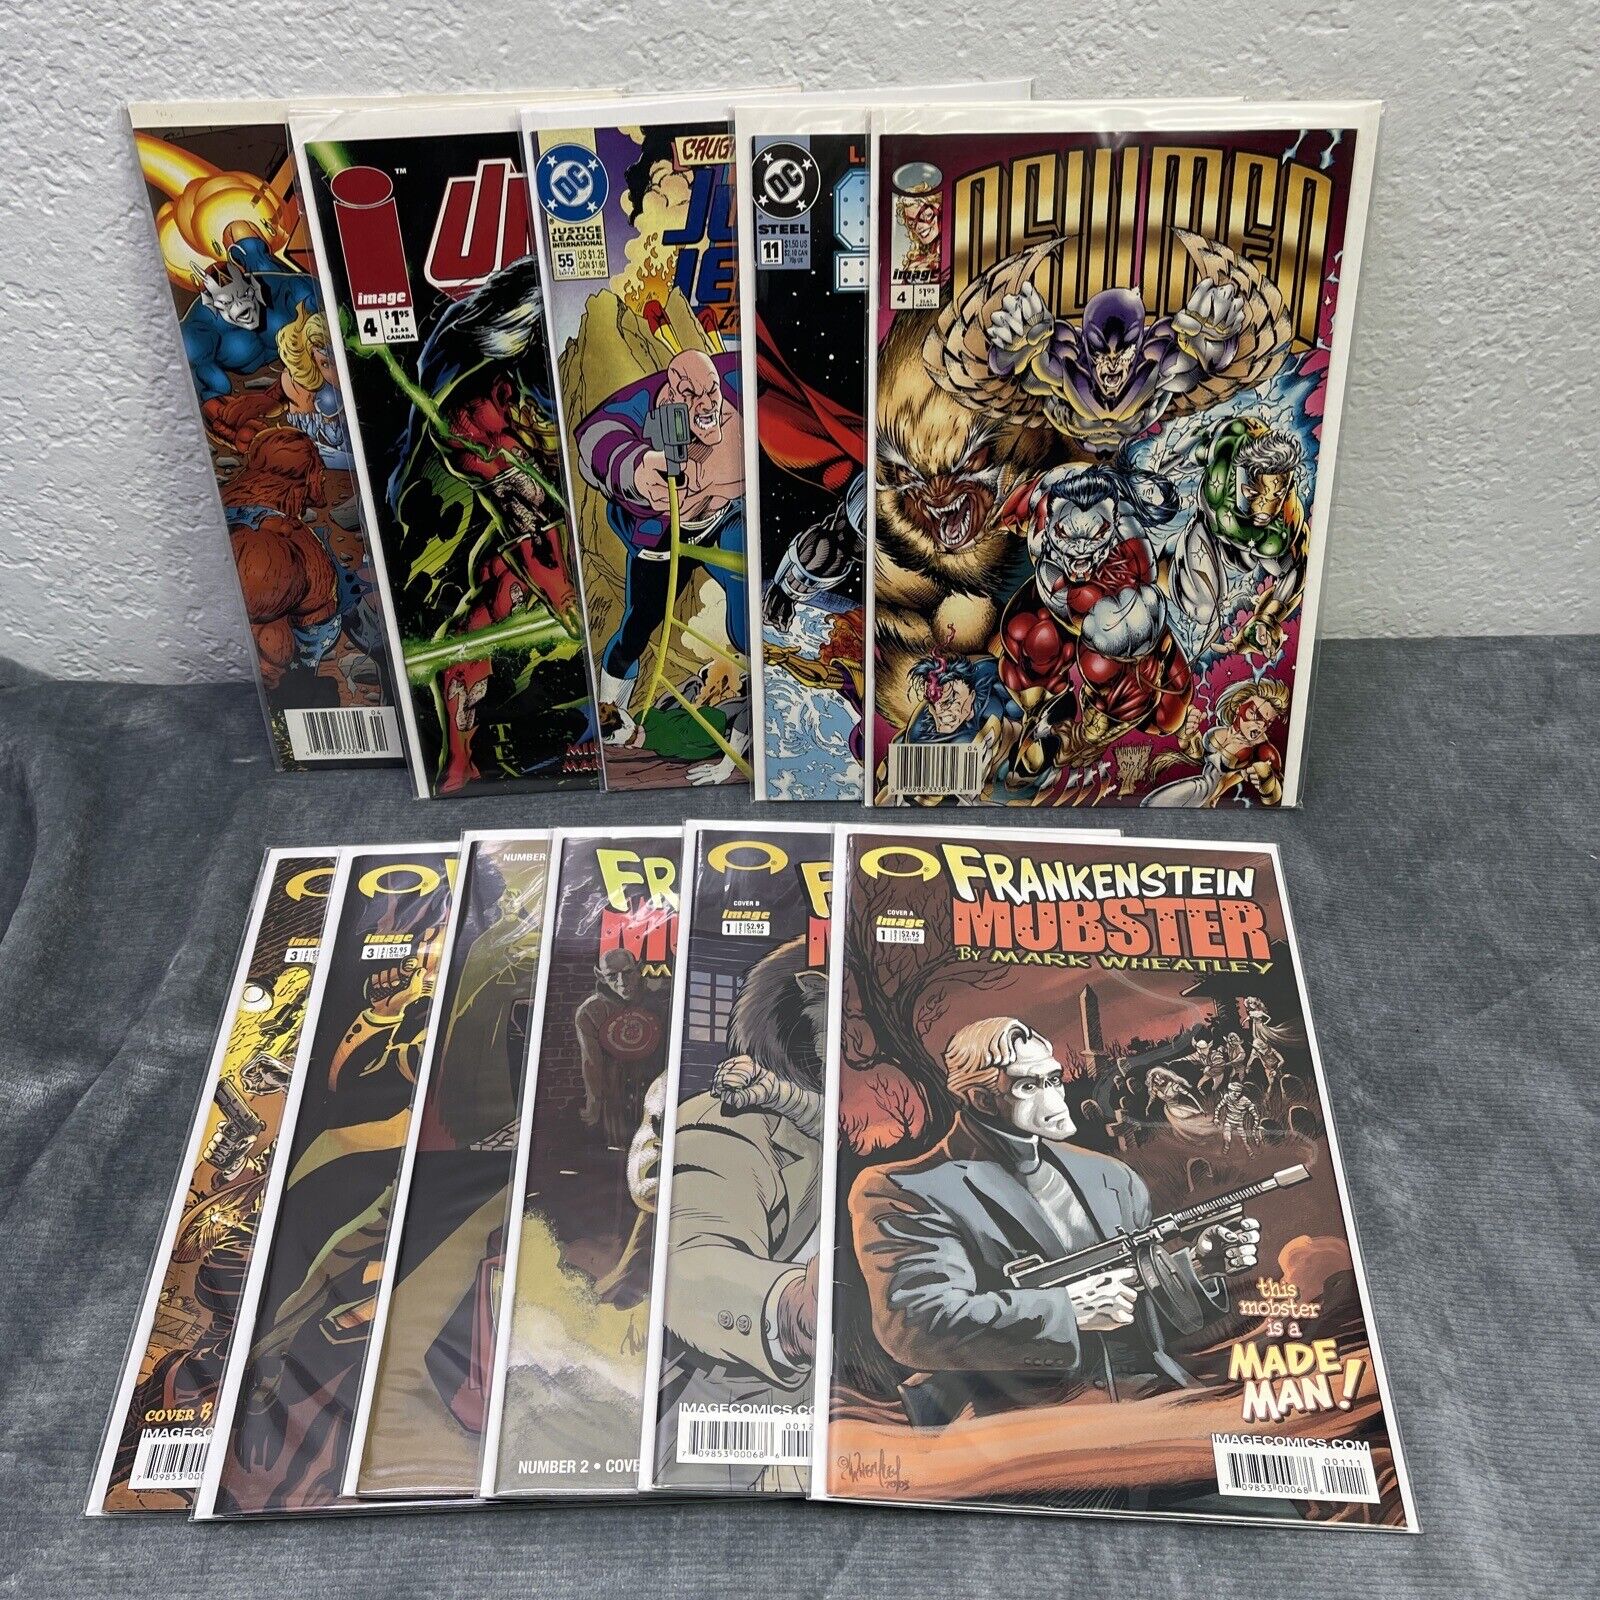 Comic Book Lot Qty 11 Newmen Steel Justice League Frankenstein Mobster Union